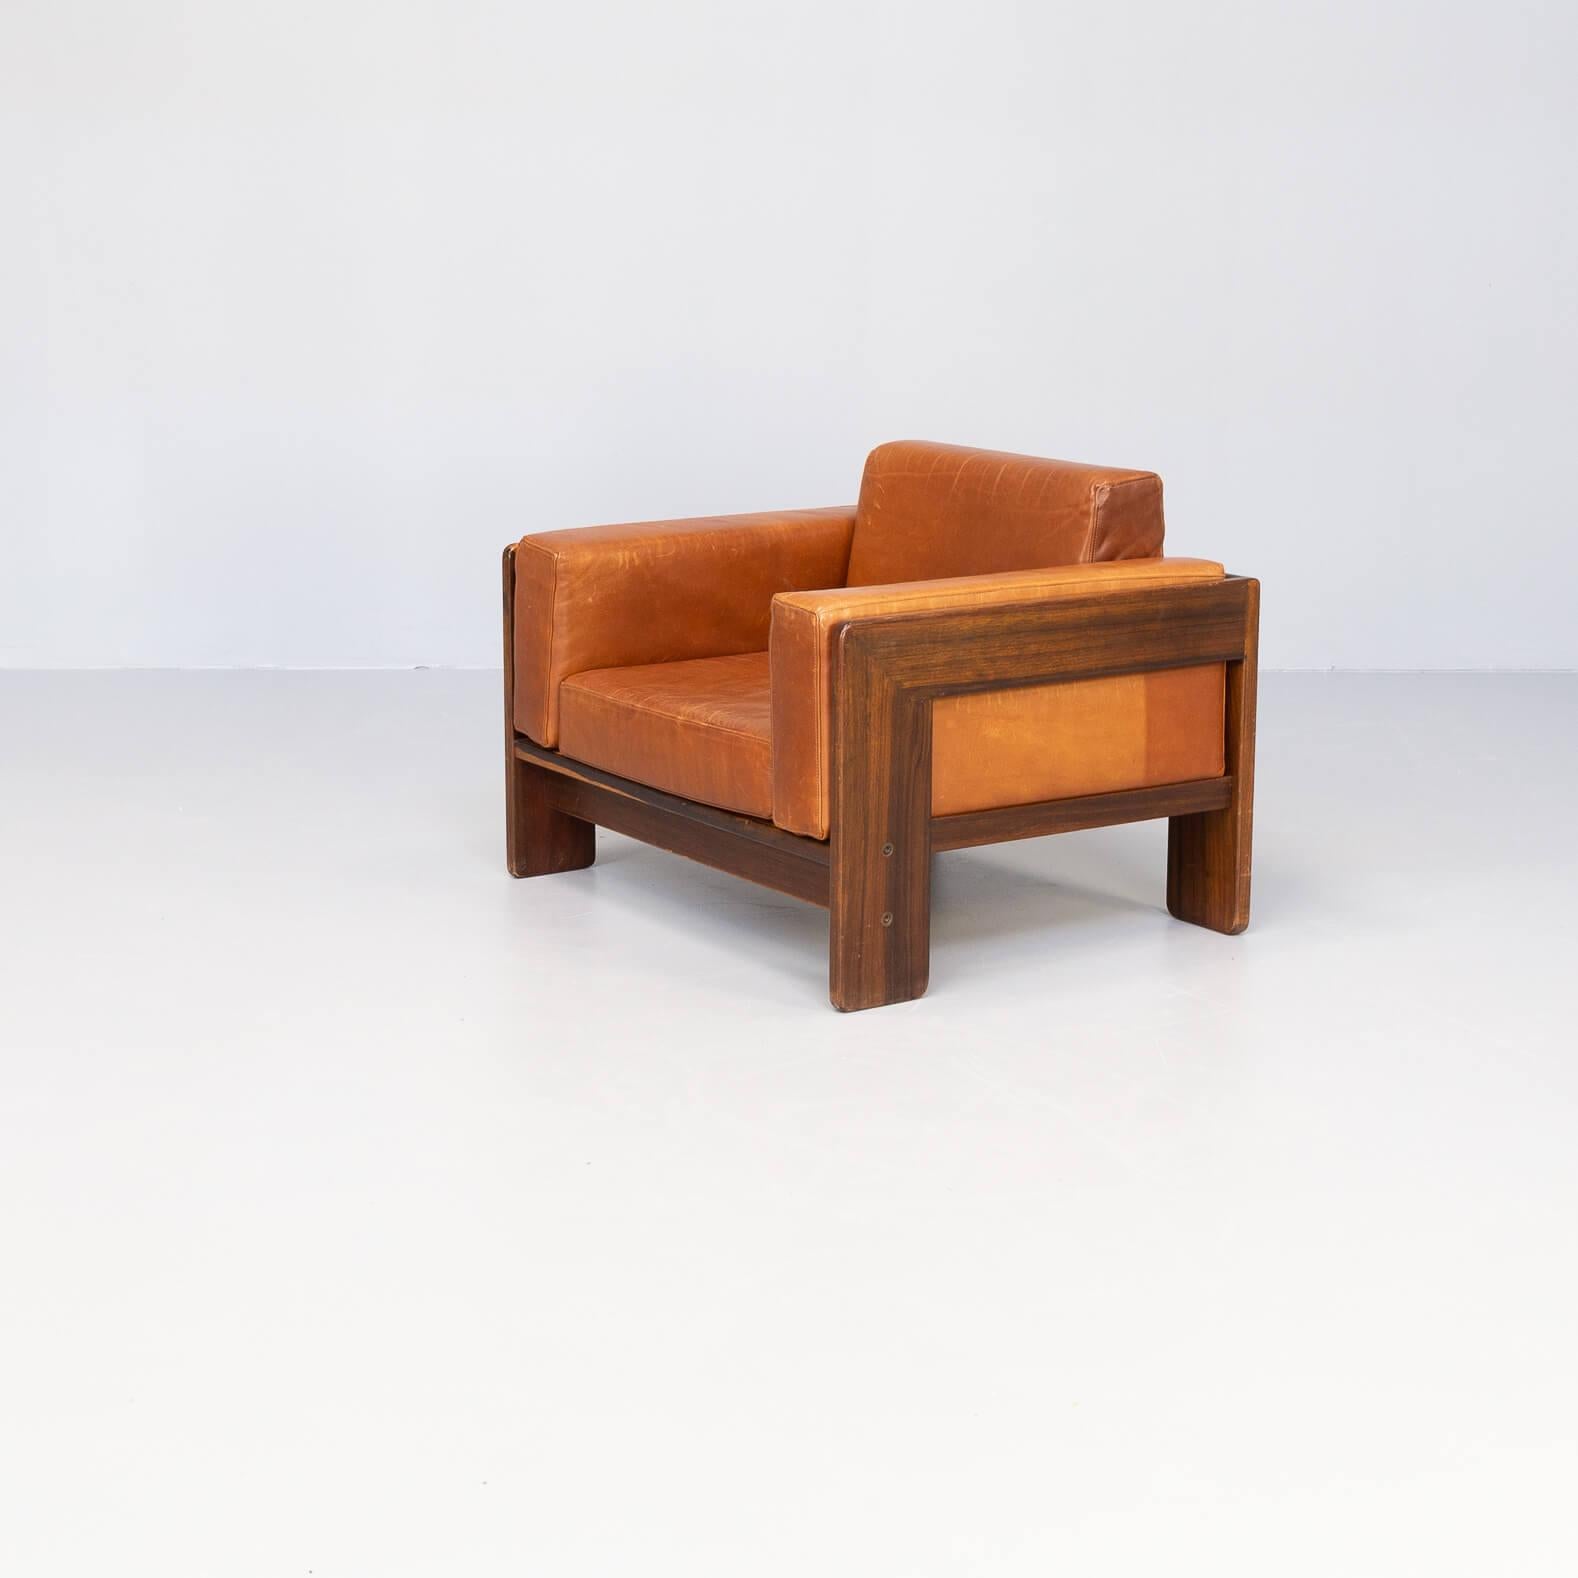 60s Tobia Scarpa ‘Bastiano’ Sofa, Fauteuil & Sidetable Set for Knoll For Sale 7